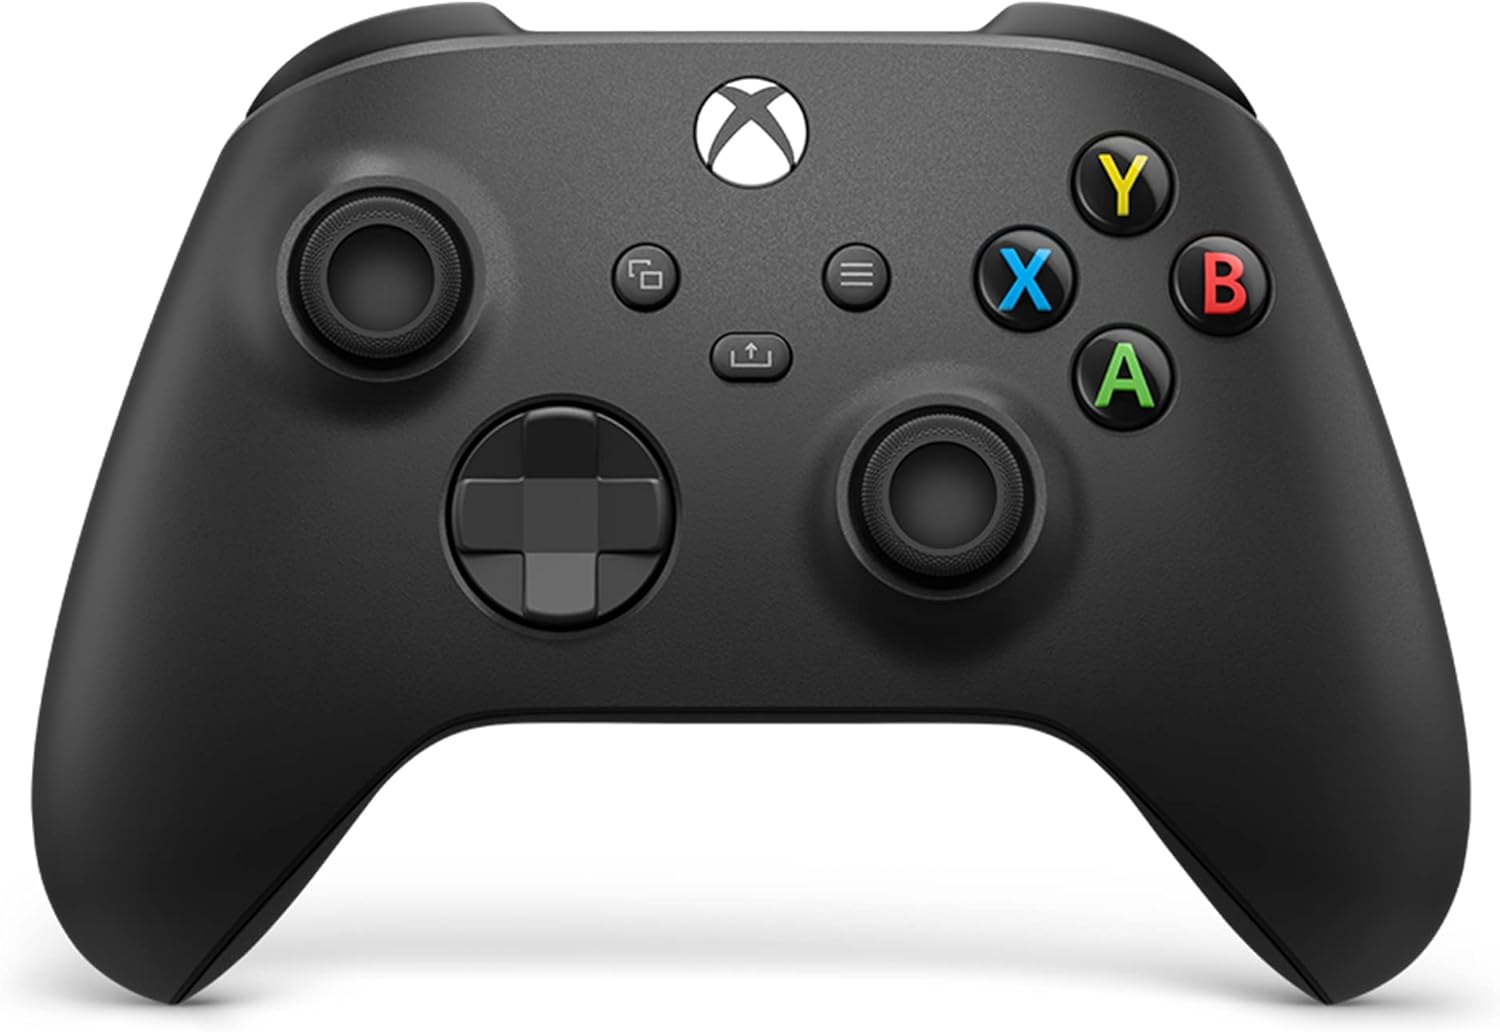 Xbox Core Wireless Gaming Controller – Carbon Black – Xbox Series X|S, Xbox One, Windows PC, Android, iOS